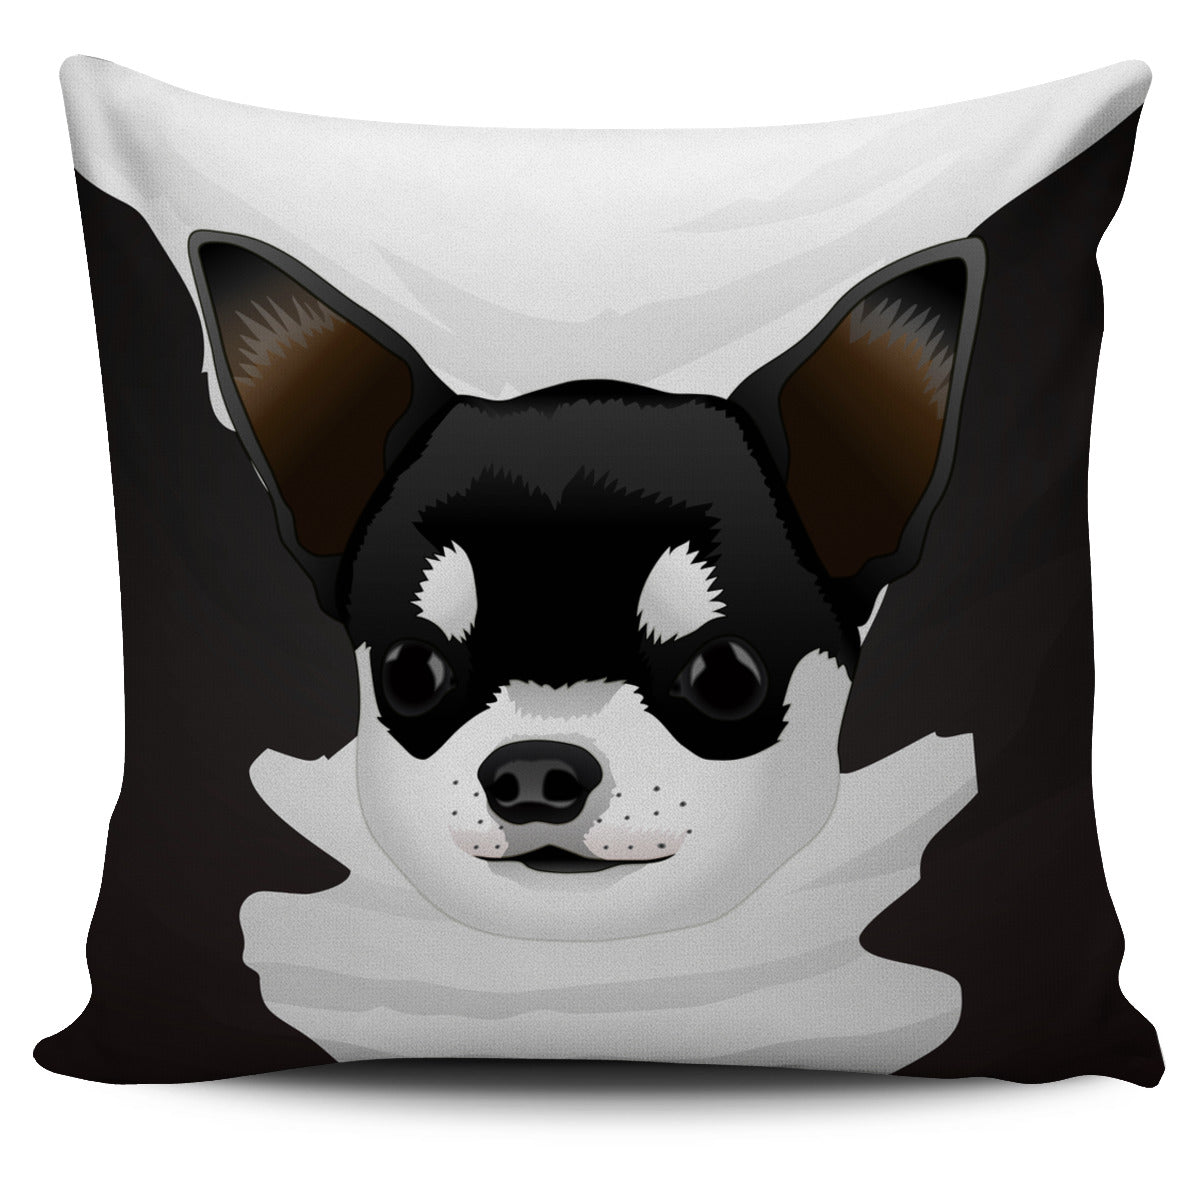 Real Chihuahua Pillow Case